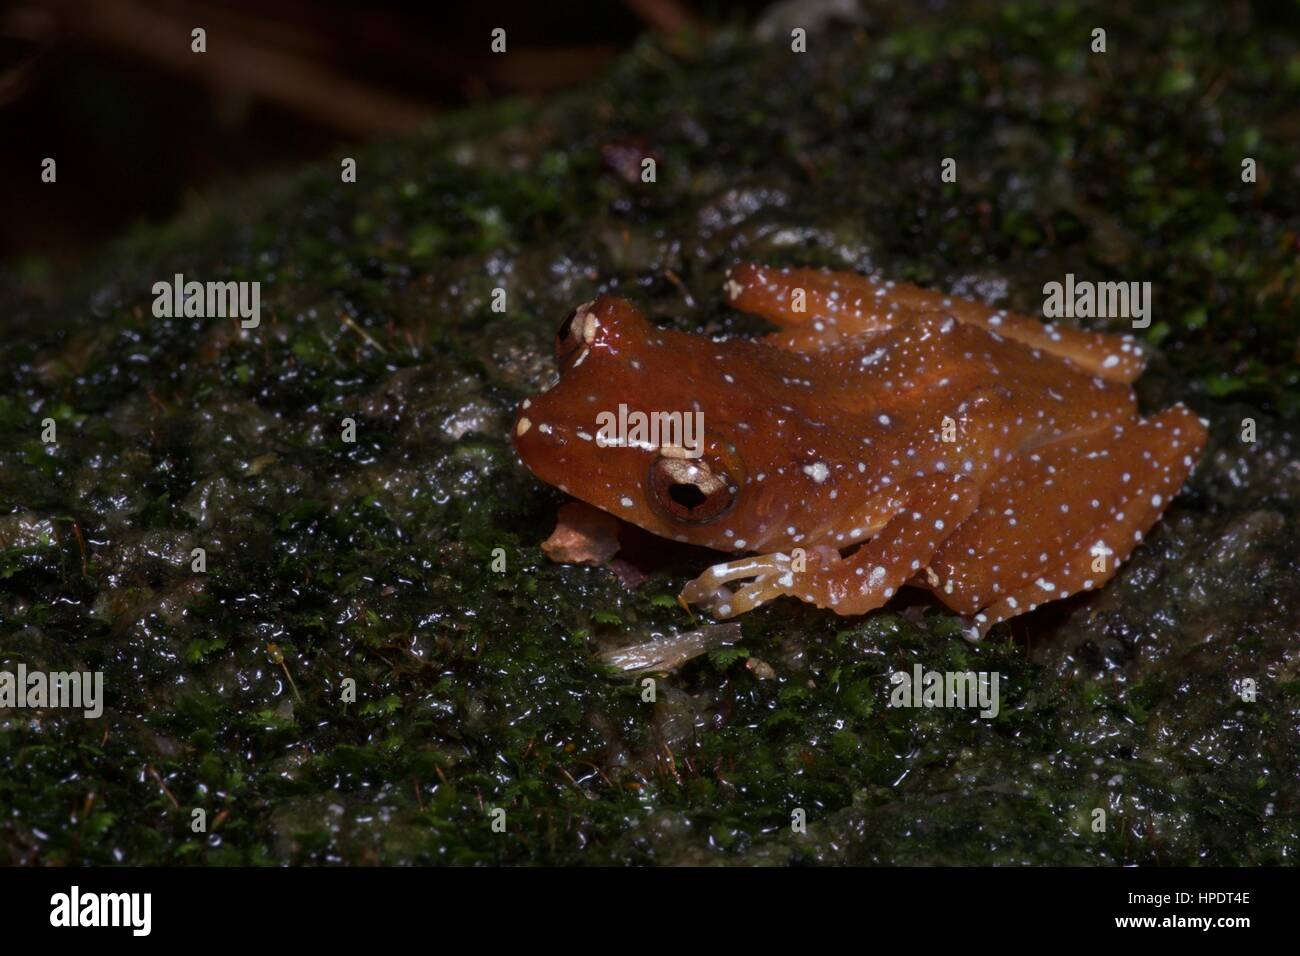 A Cinnamon Frog (Theloderma pictum) in the rainforest at night in Semenyih, Selangor, Malaysia Stock Photo